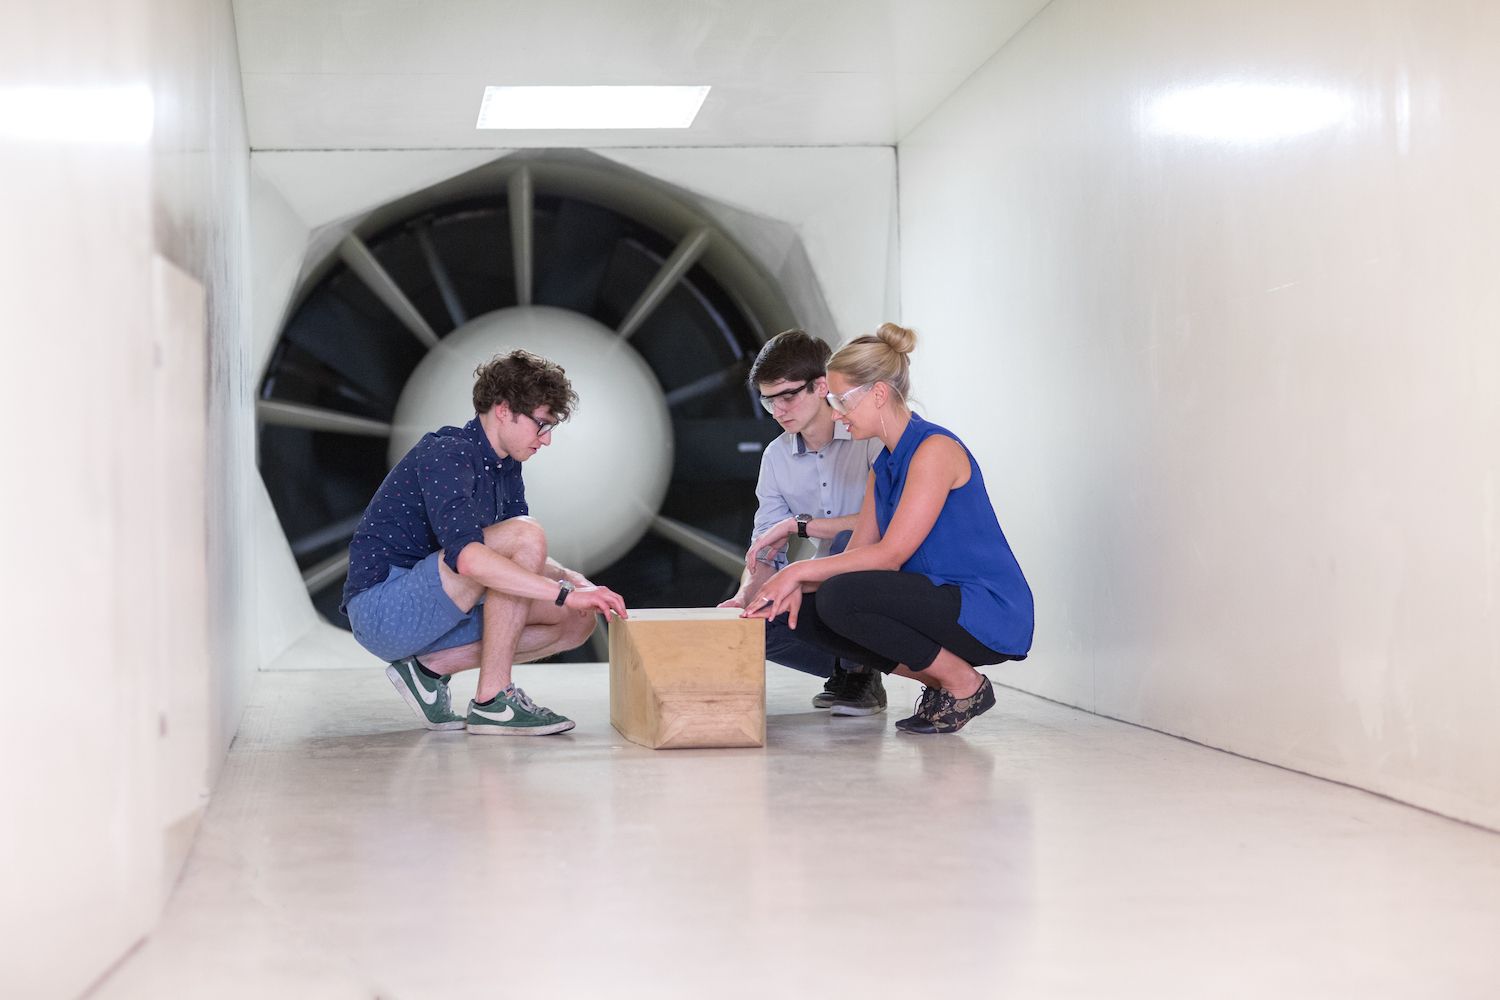 Students in wind tunnel with large turbine.